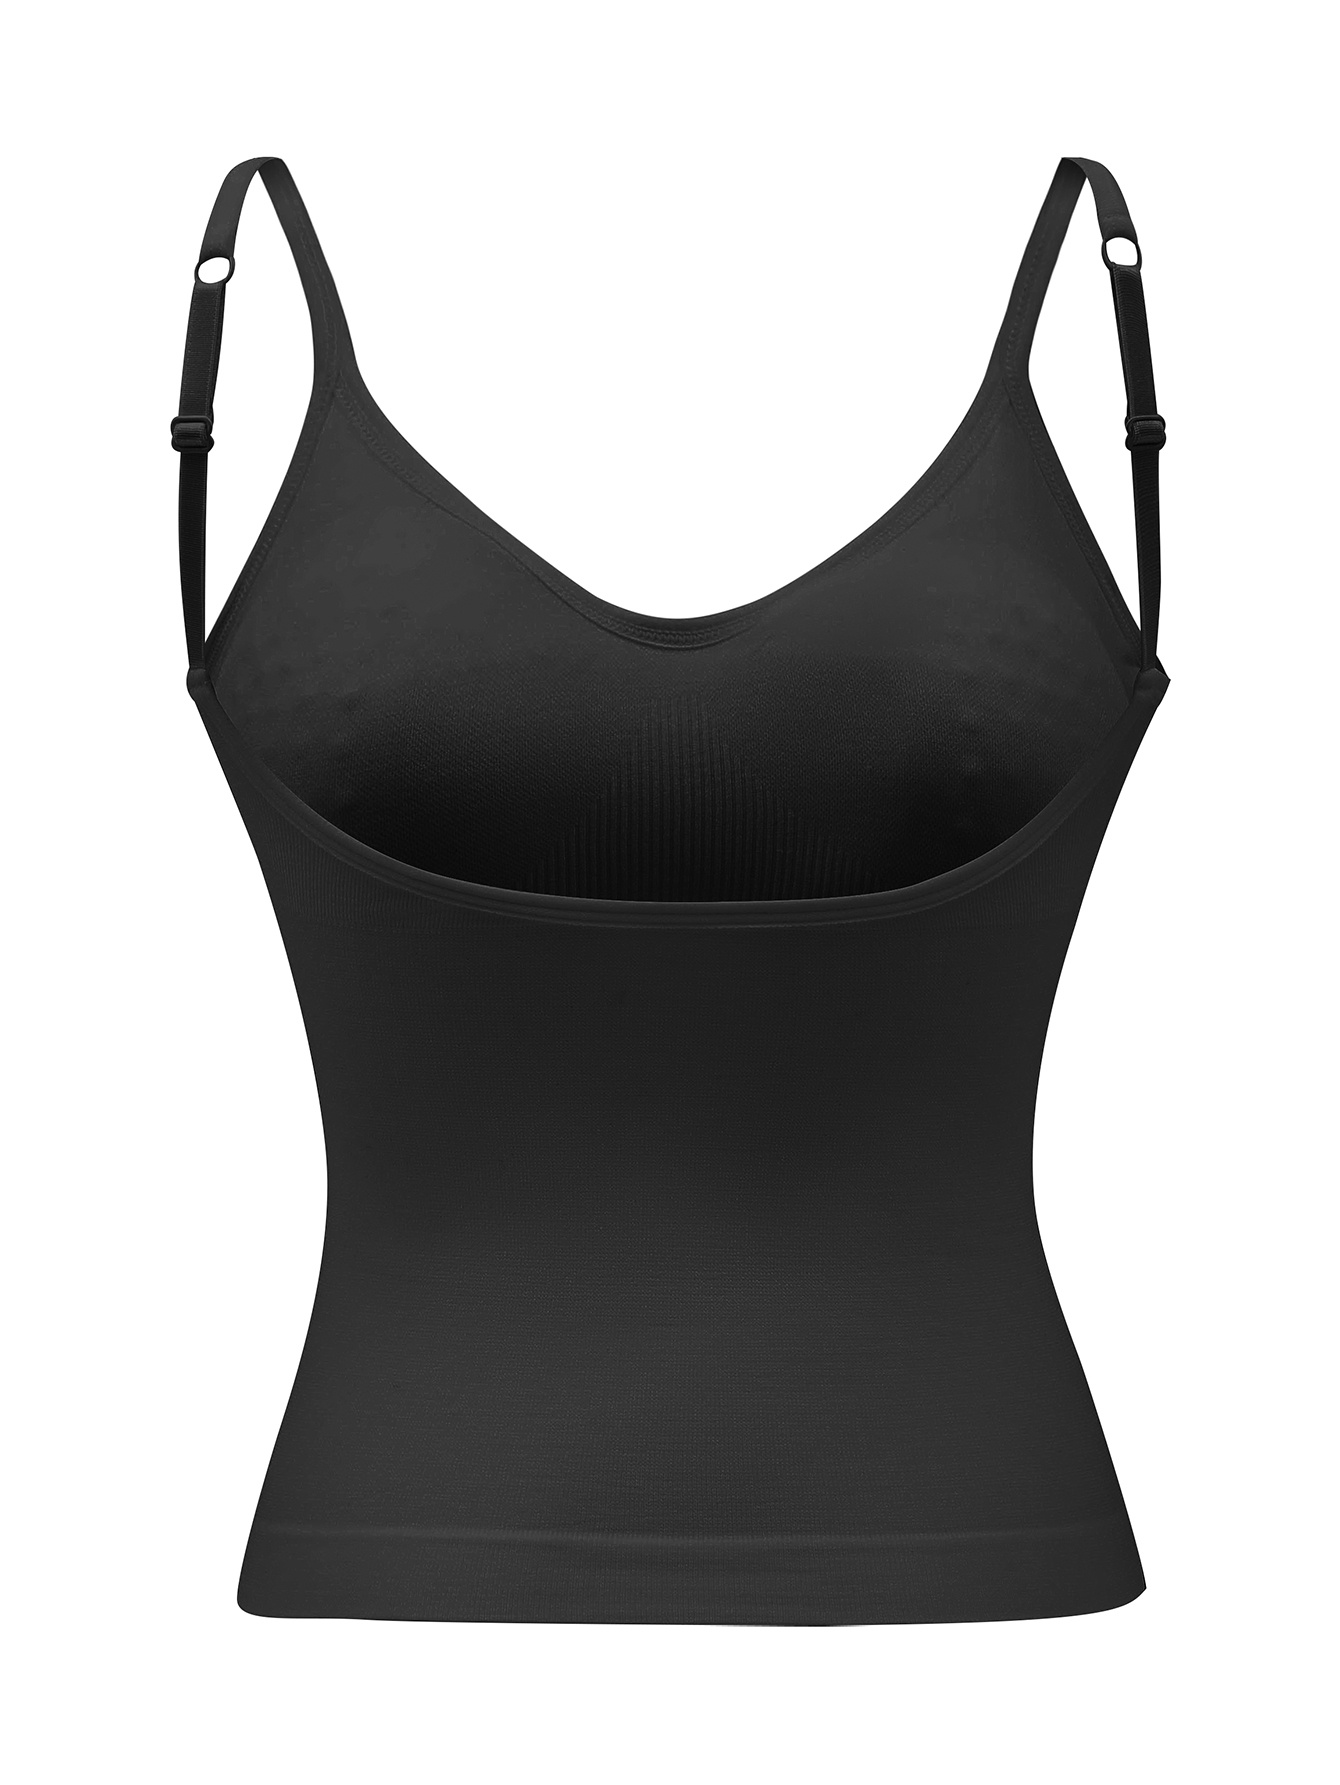 Women's Tank Top Seamless Lingerie Padded Camisole Black- D3002